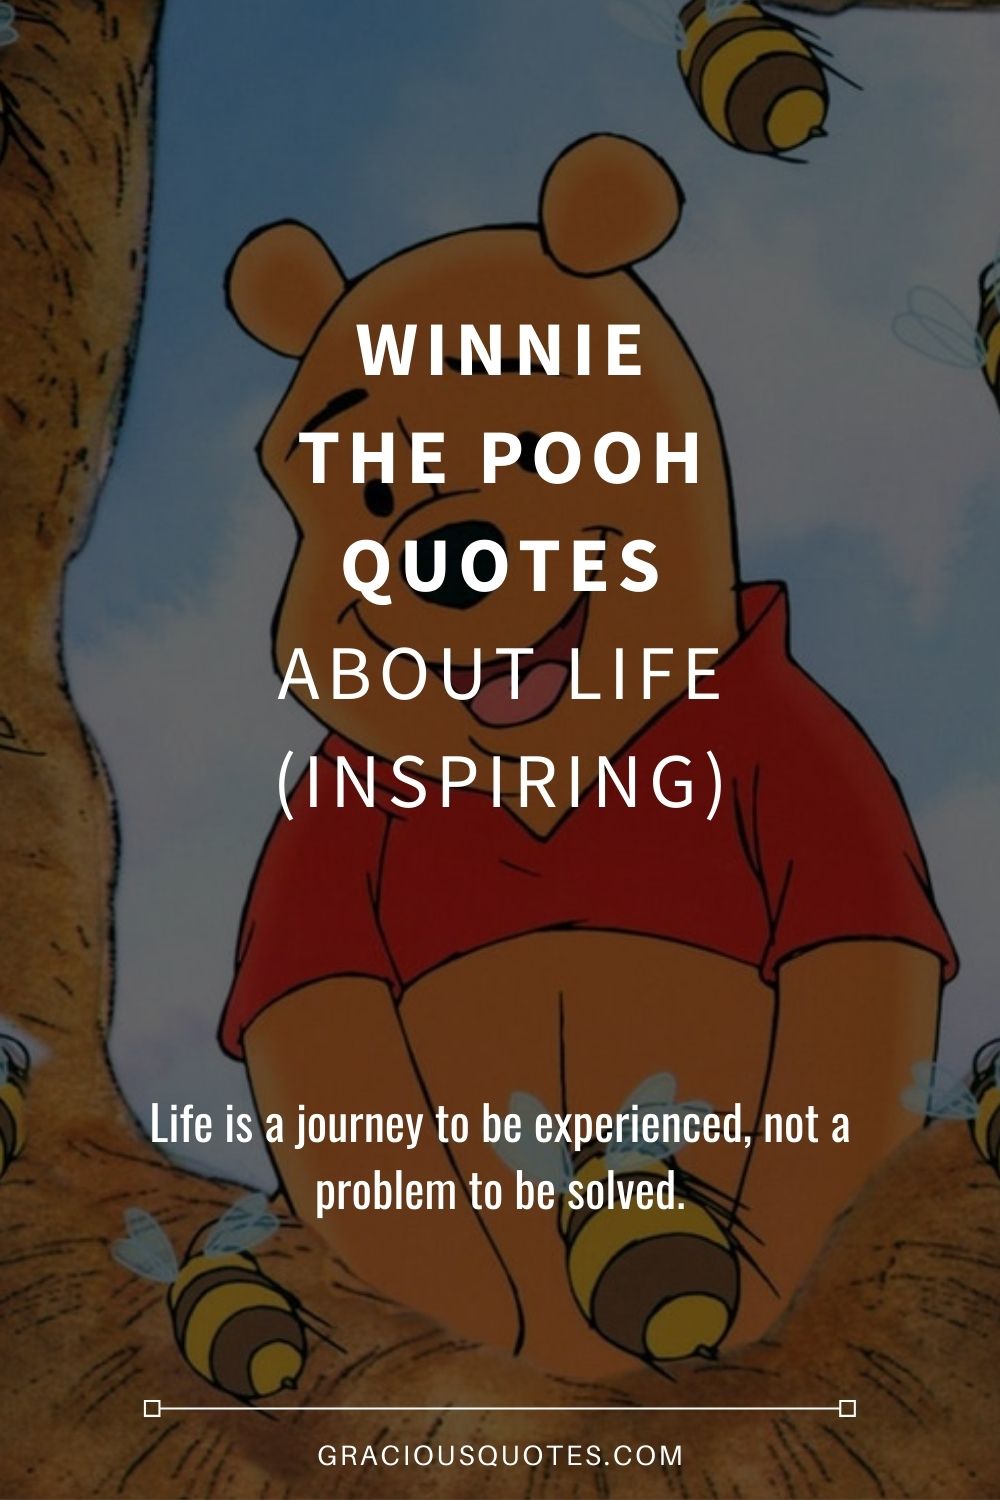 Winnie the Pooh Quotes About Life (INSPIRING) - Gracious Quotes